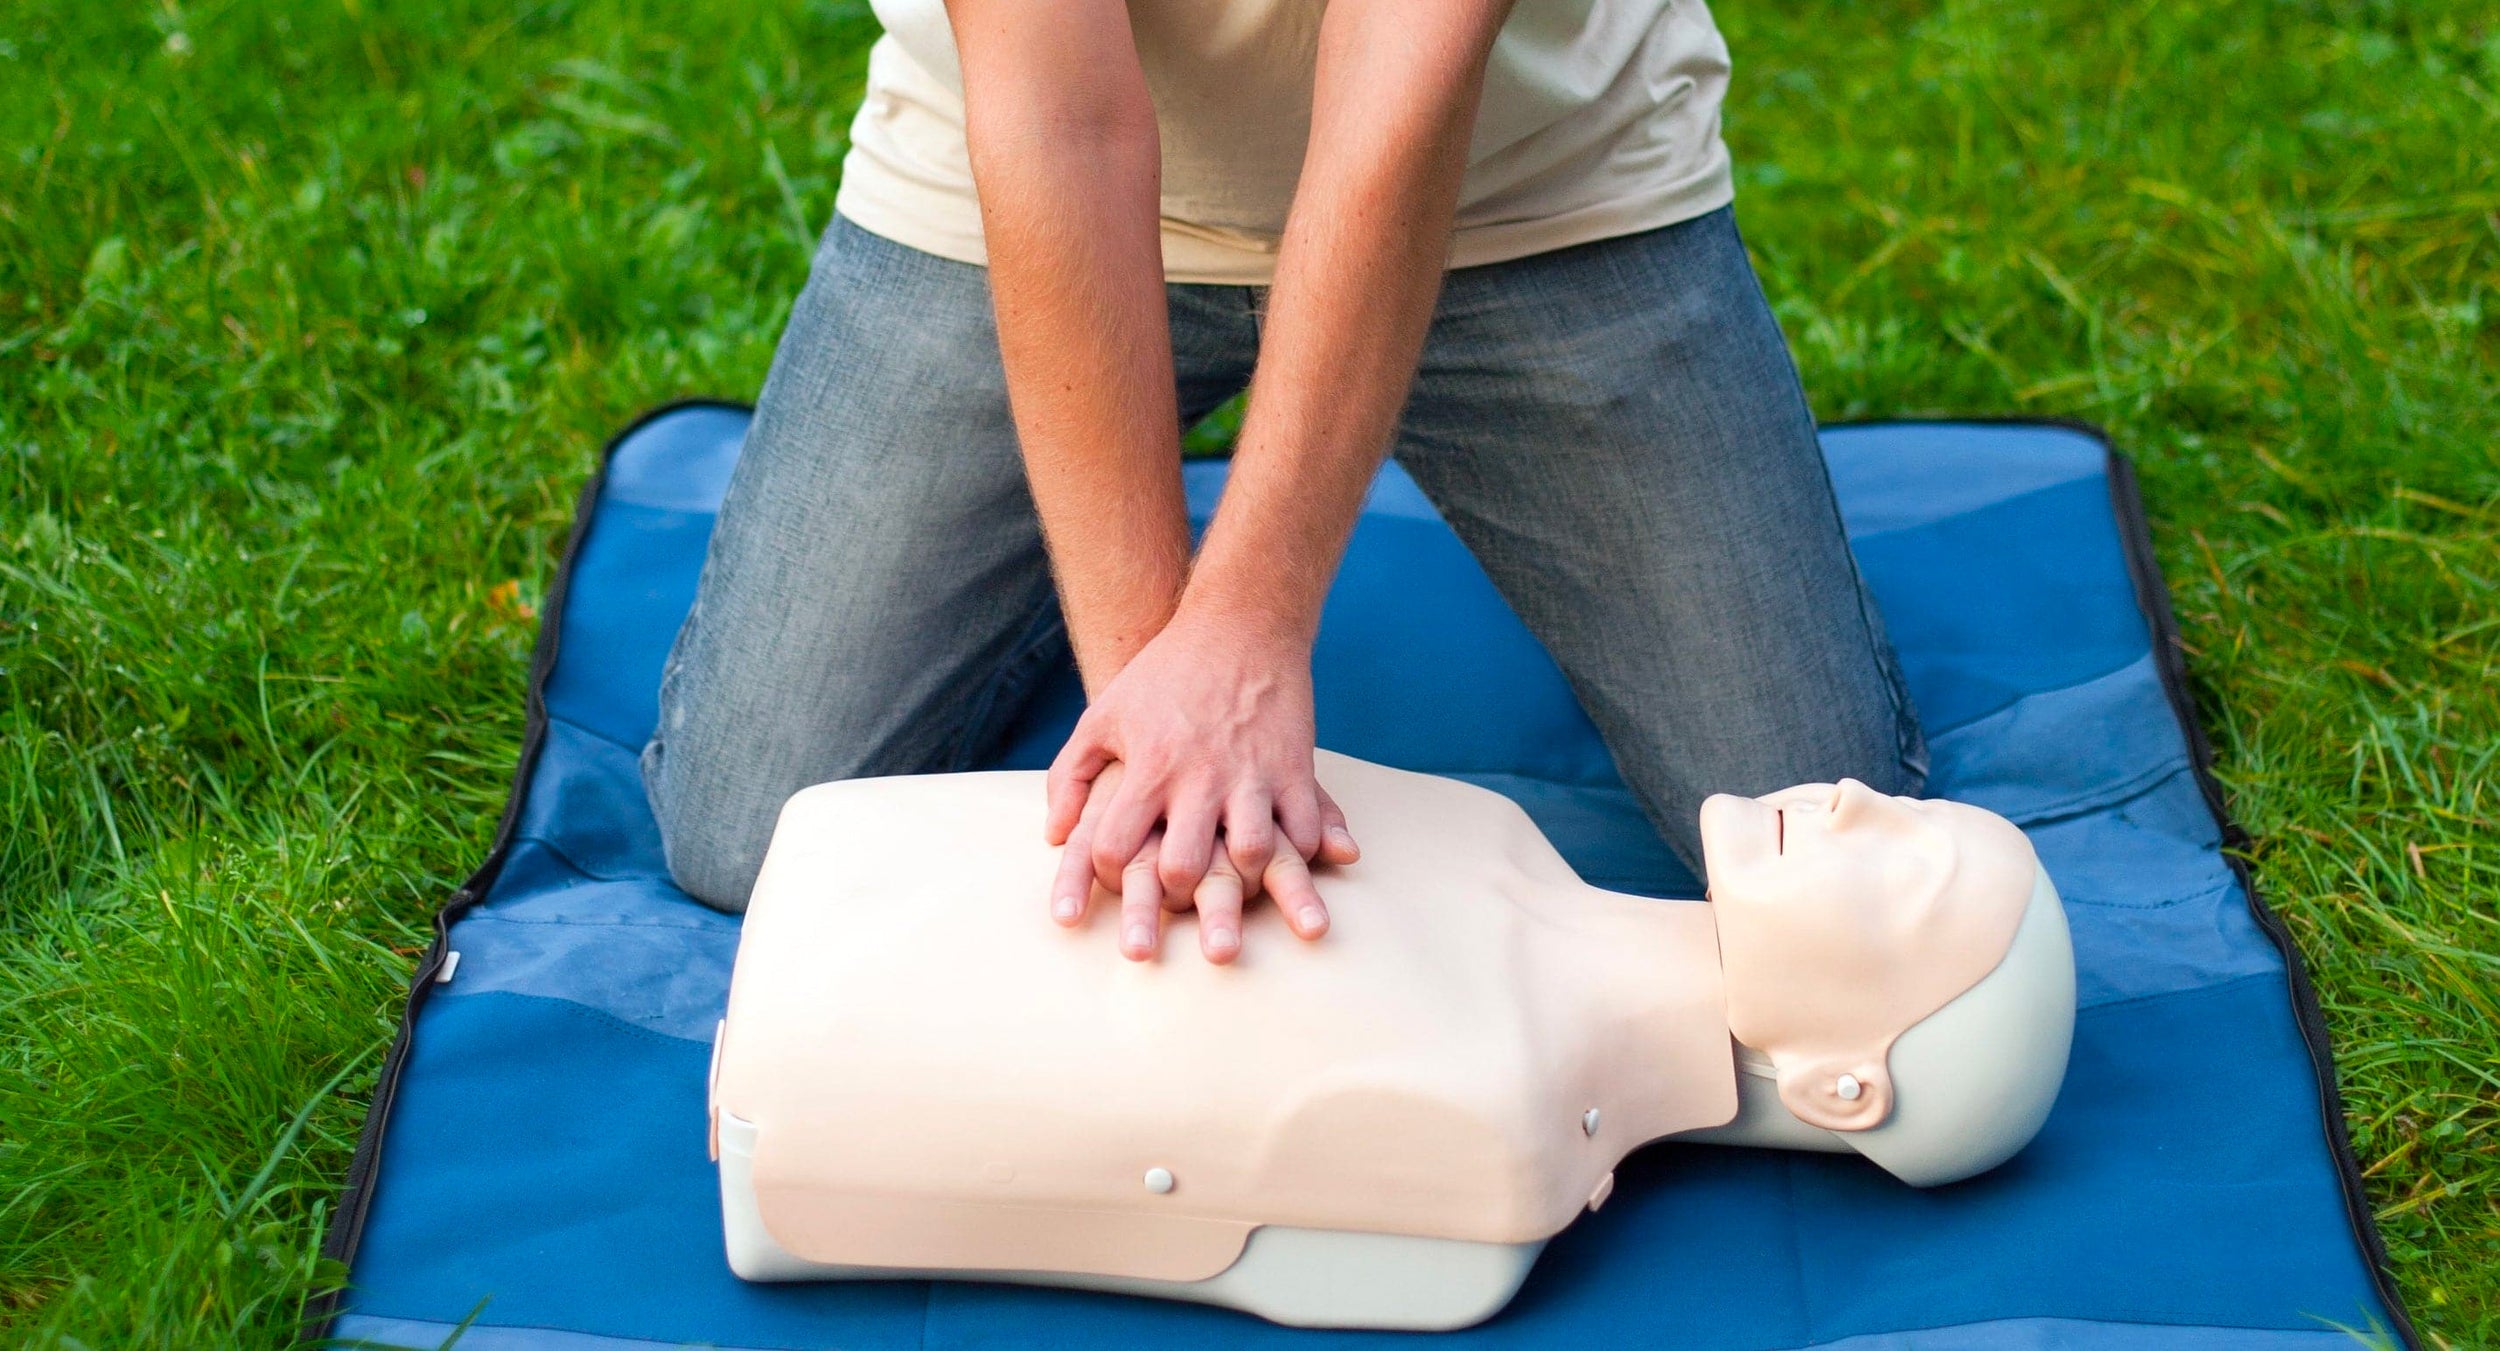 CPR Certification - Compressions